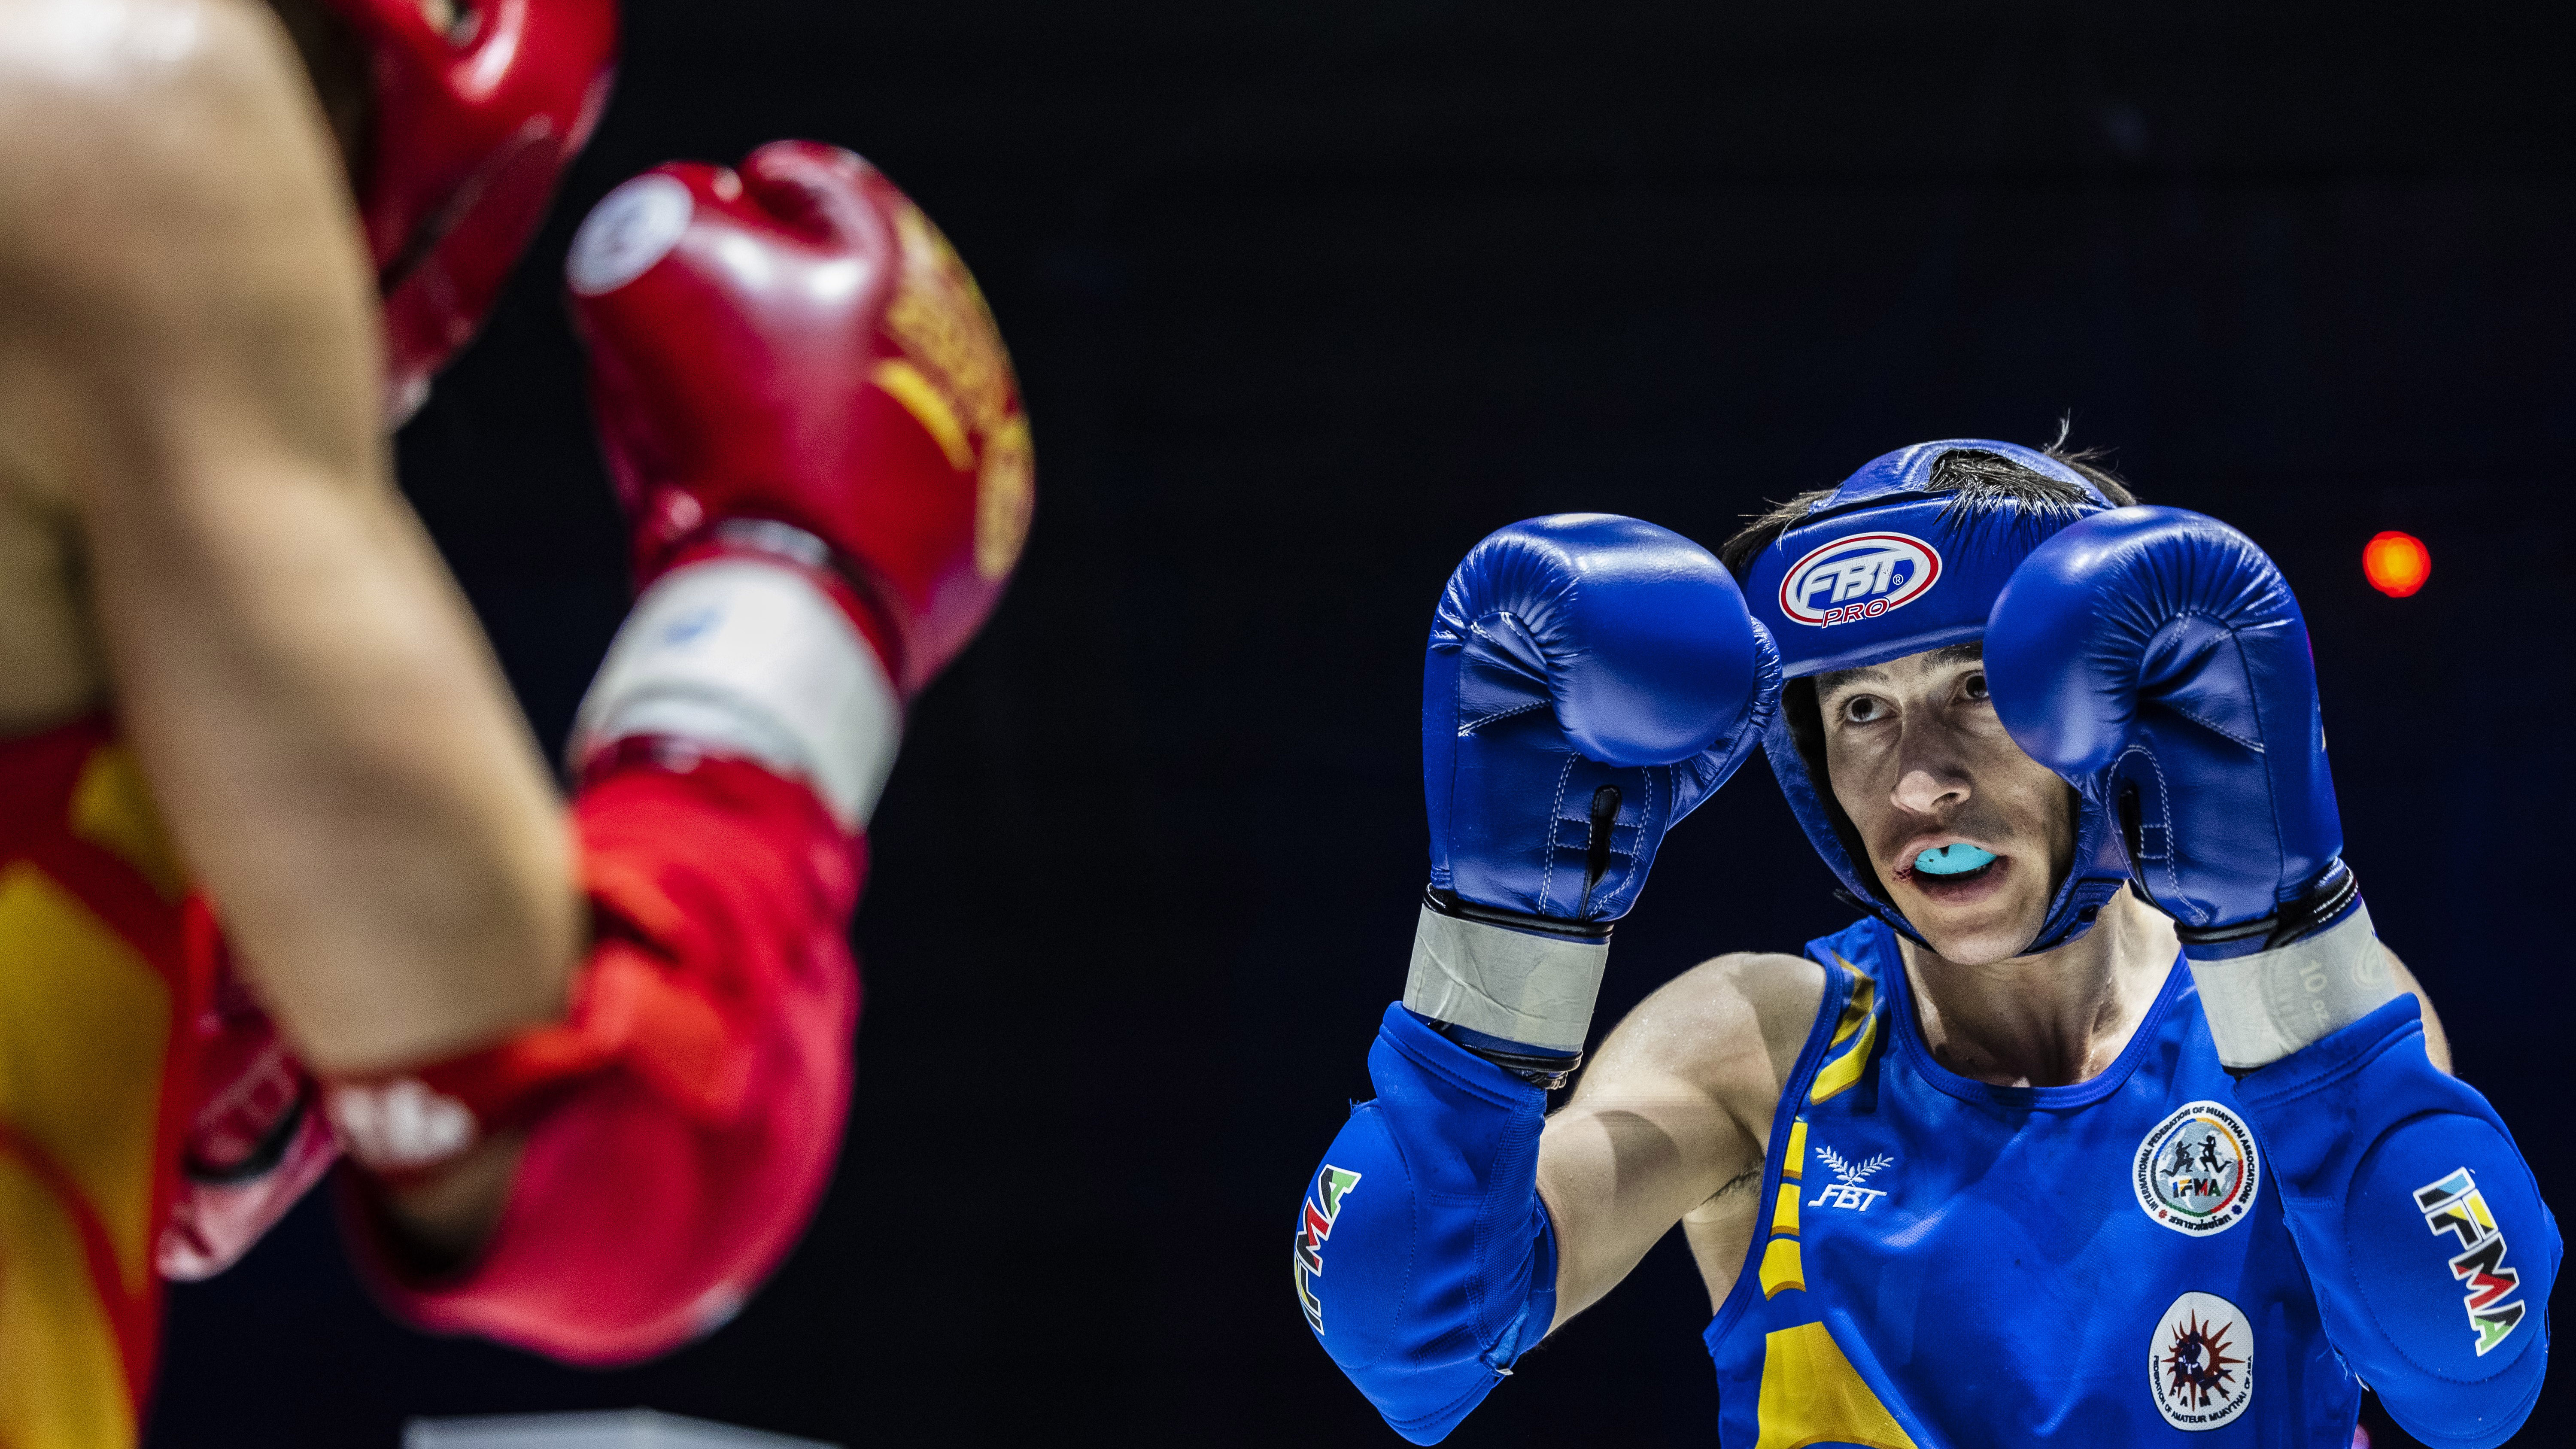 Sayed while competing in the world championship in thaixboxing